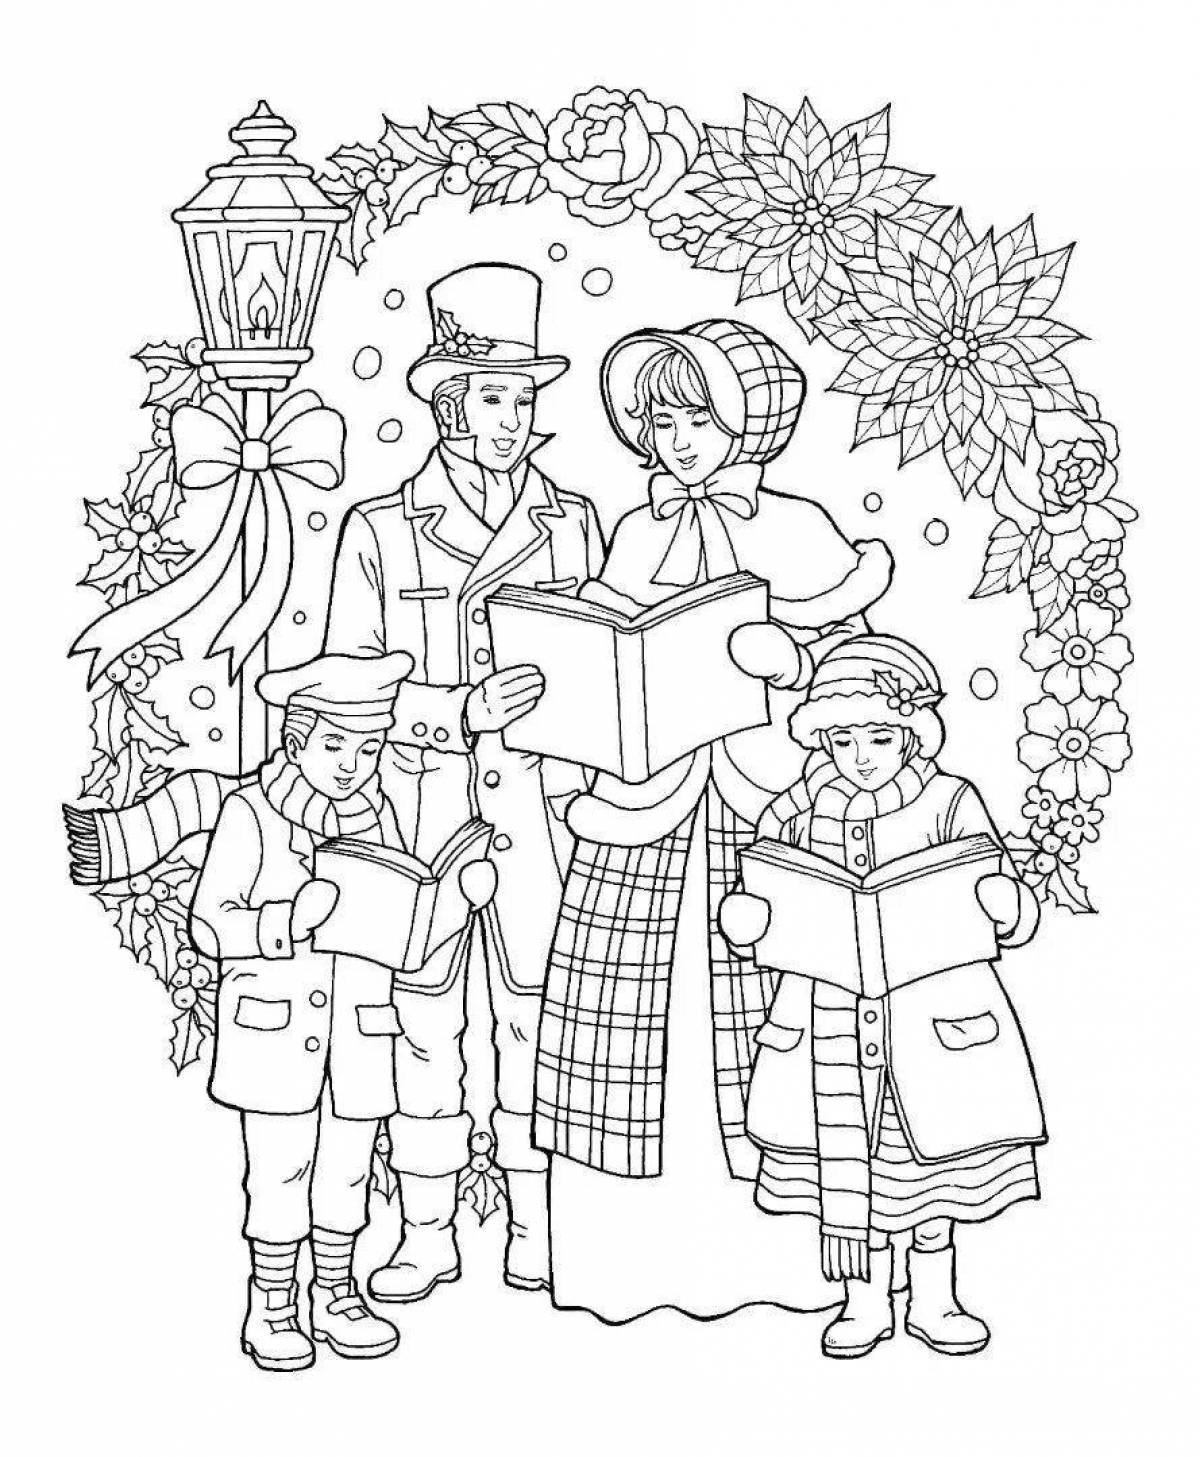 Bright Christmas family coloring book